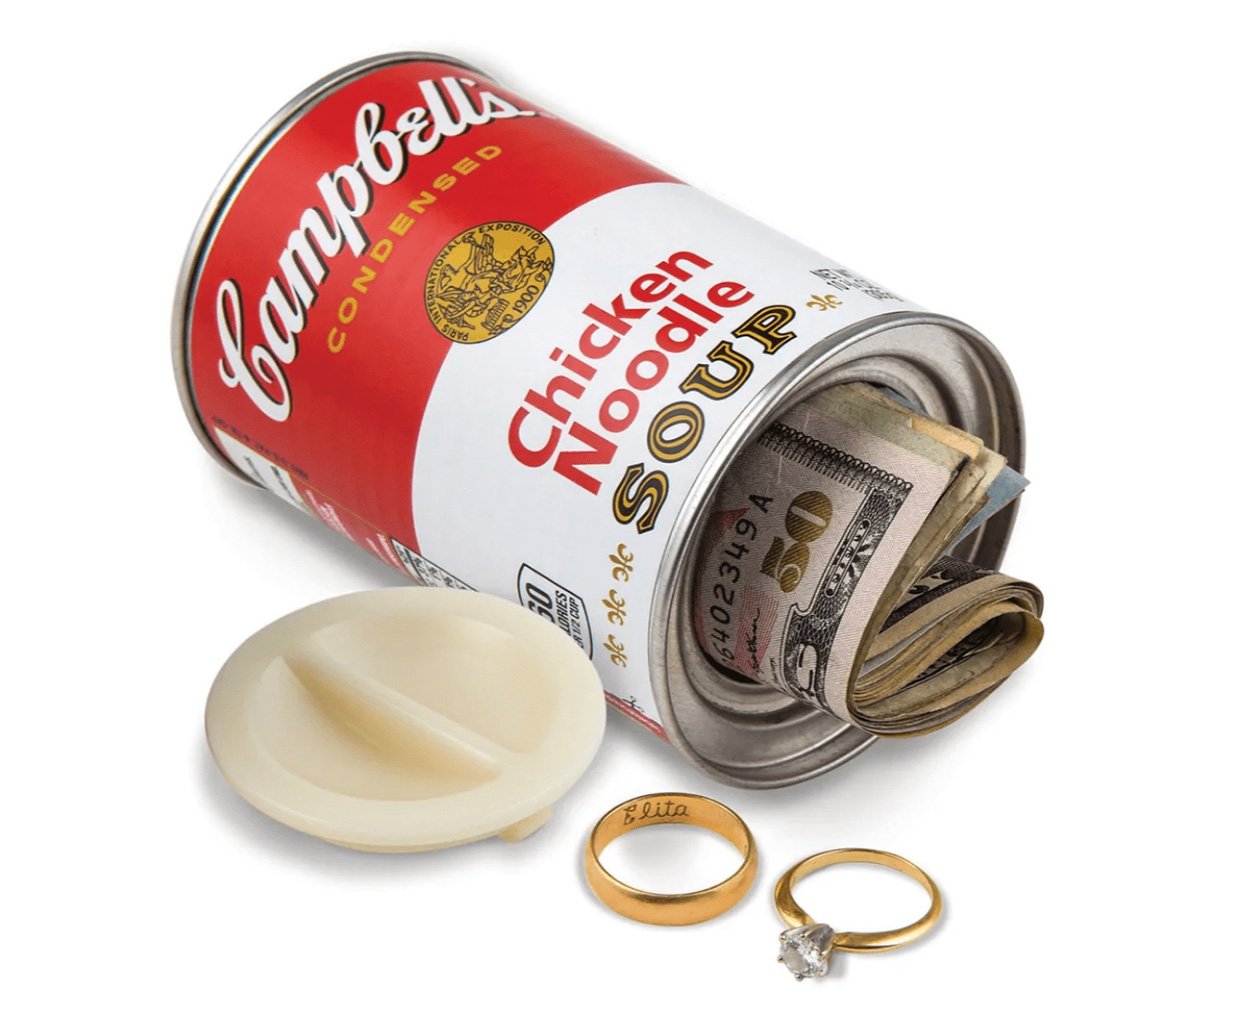 Campbell’s Chicken Noodle Soup Can Safe